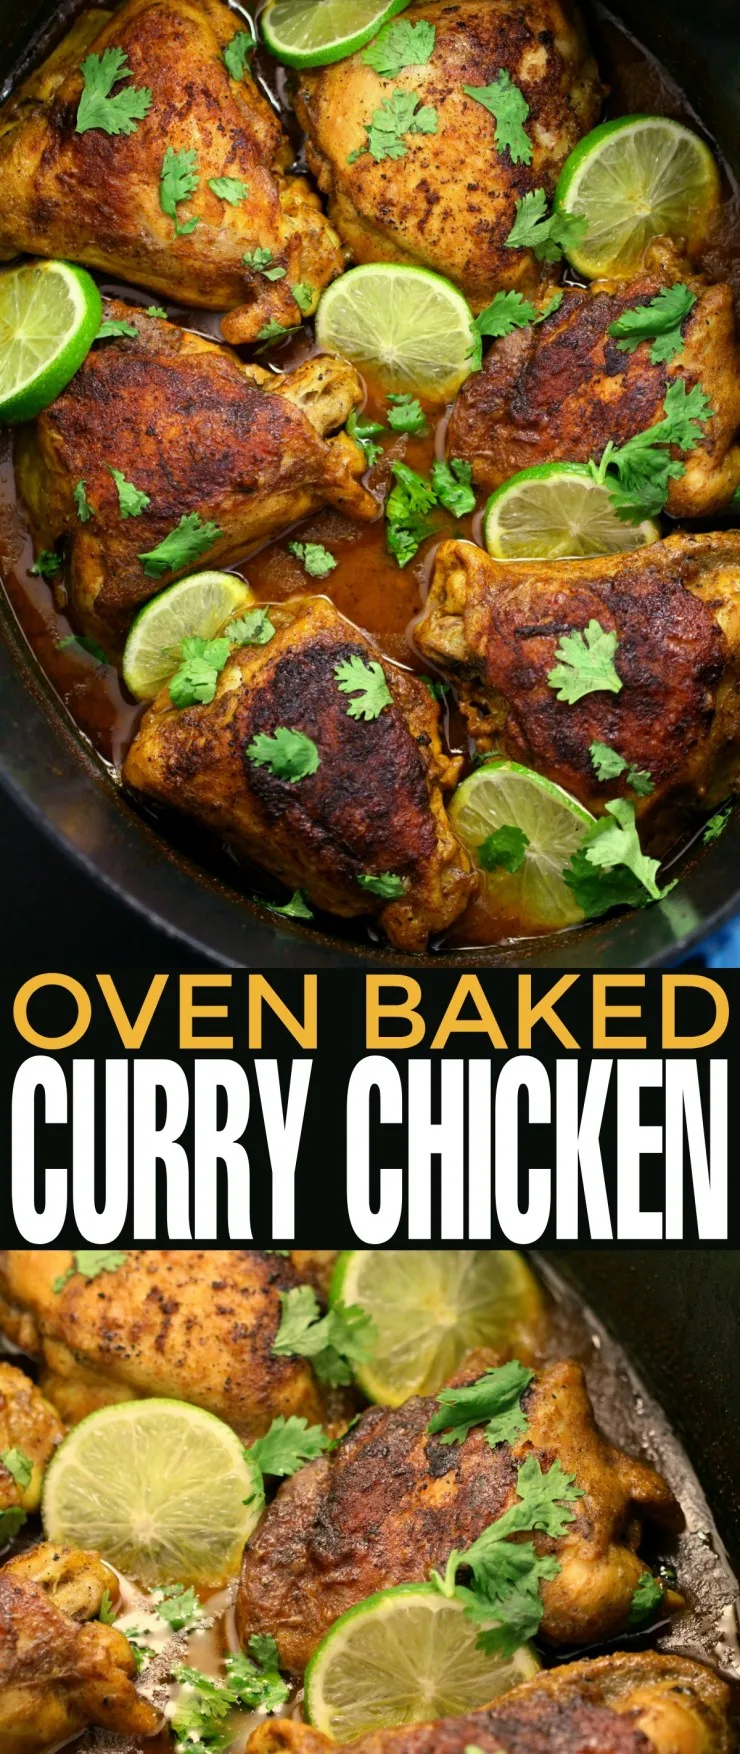 This recipe for Oven Baked Curry Chicken is a frugal feast for the whole family. Curry & spices amp up the flavour of oven baked chicken.